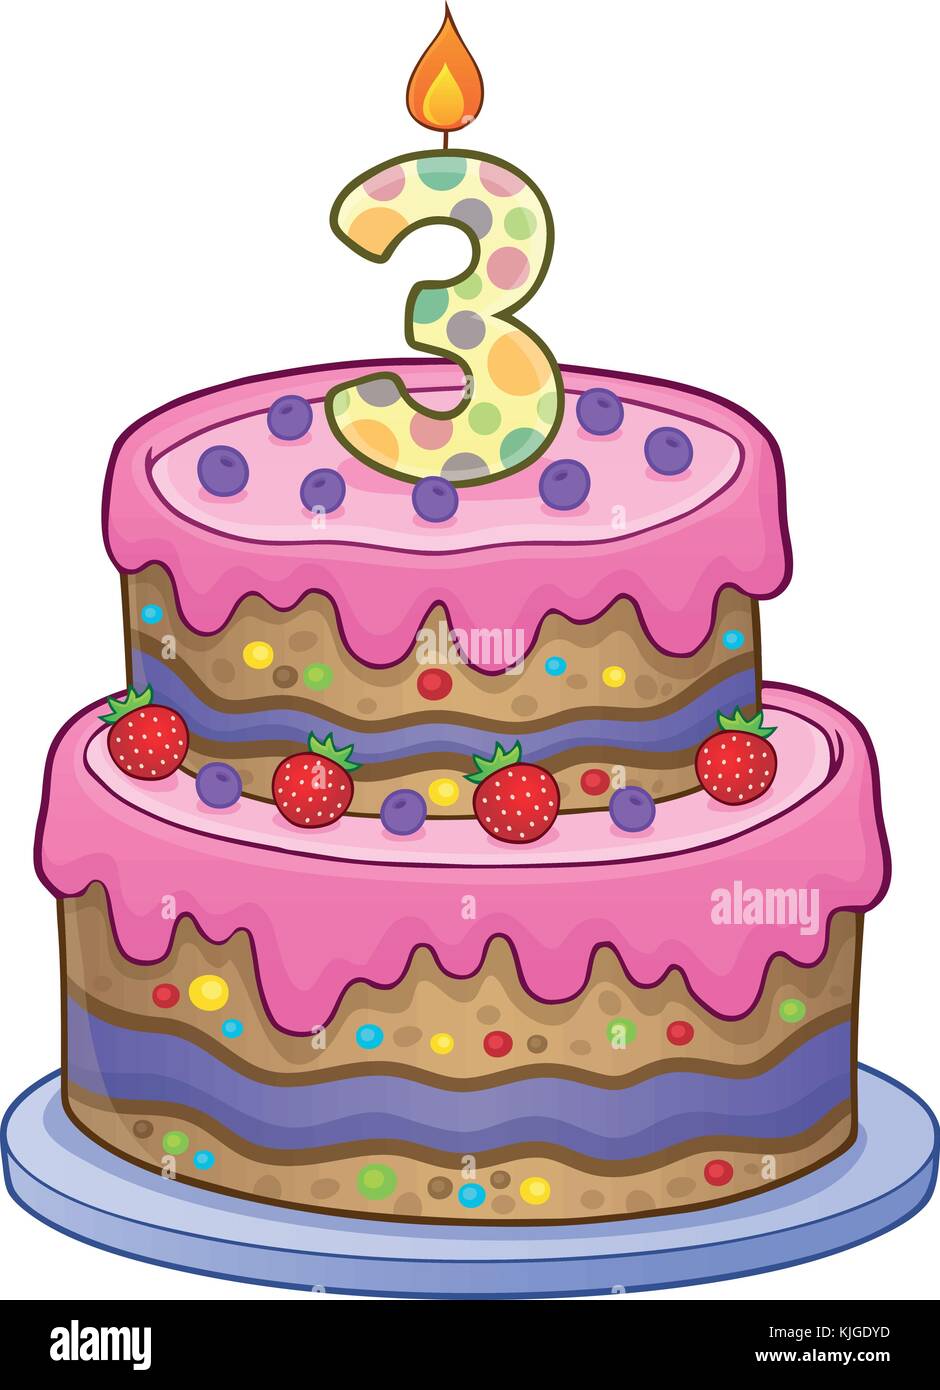 Cake 3 years old Banque d'images vectorielles - Alamy